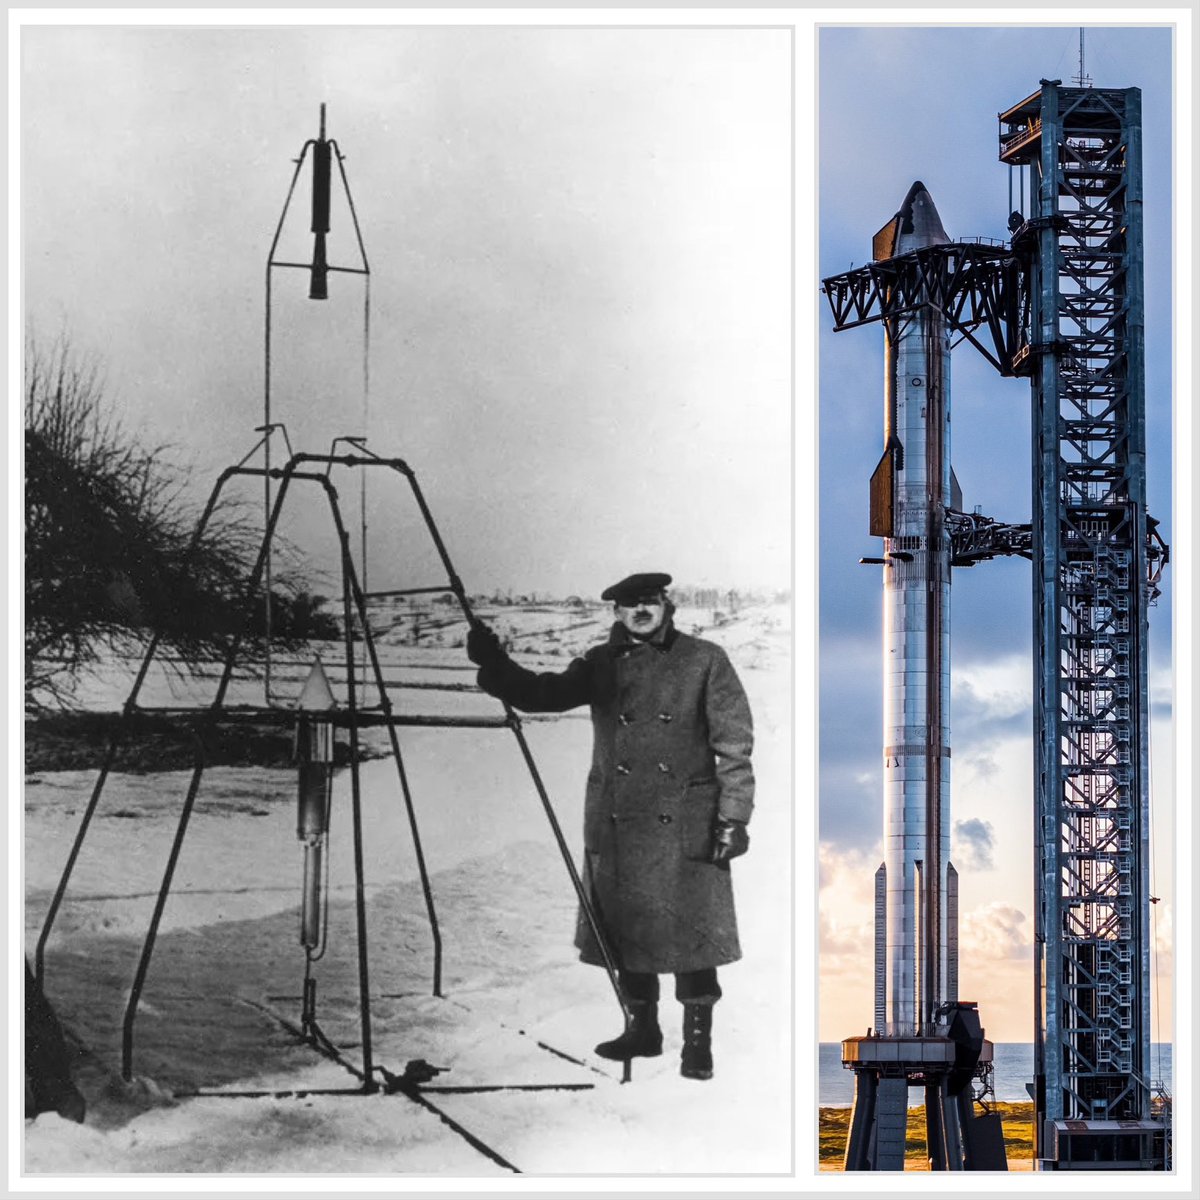 We sure have come a long way in 98 years in liquid propulsion 🚀